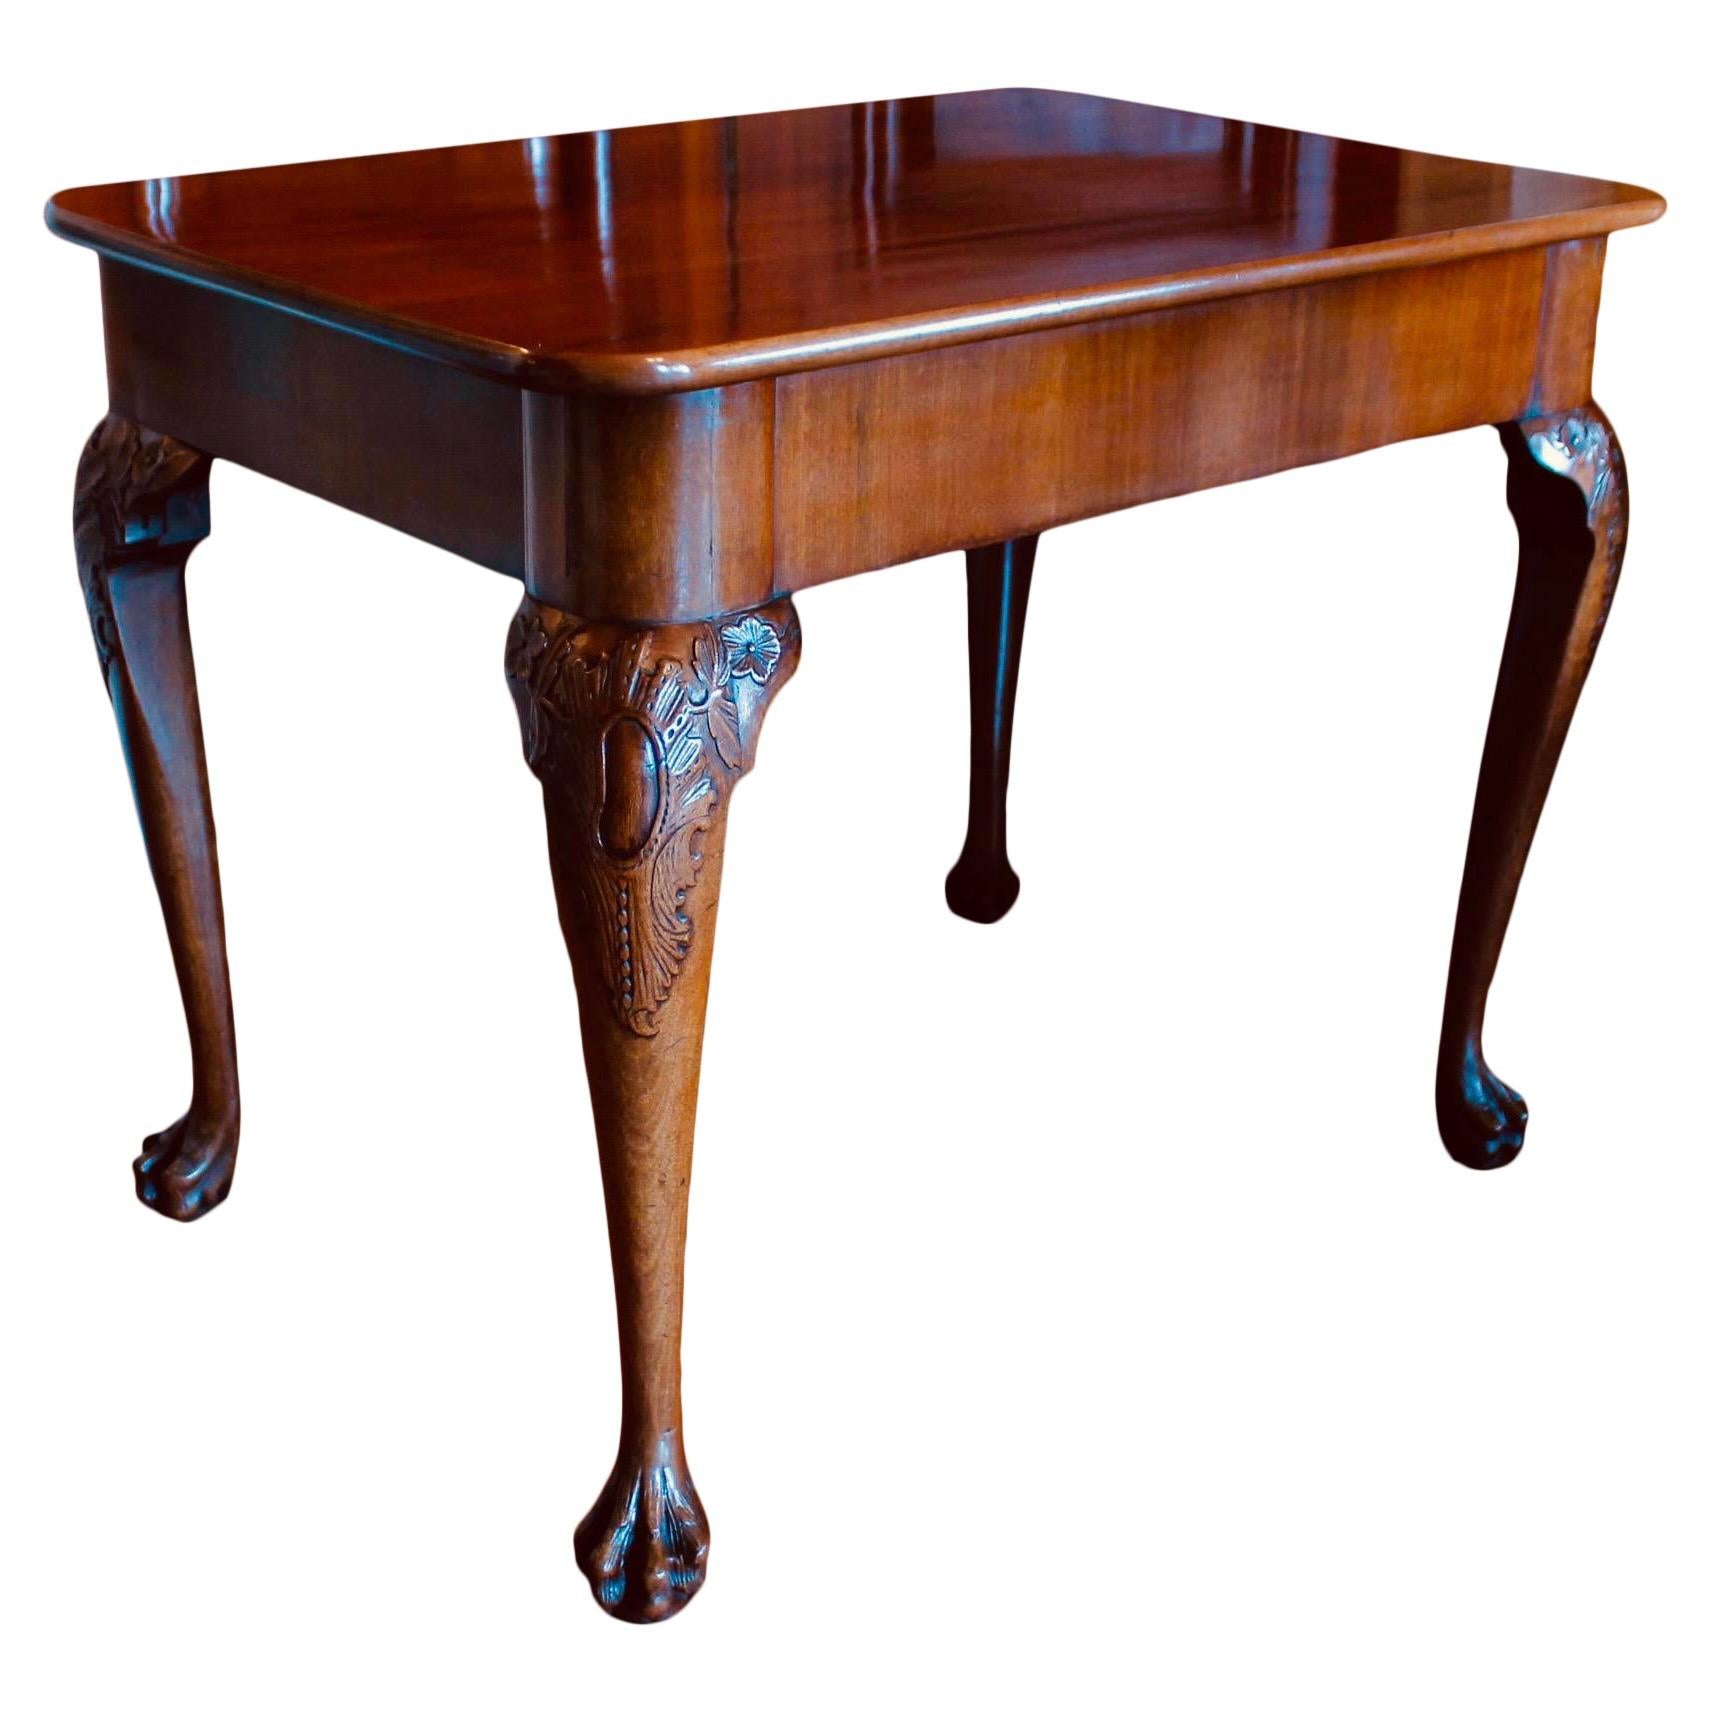 A handsome Georgian mahogany table finished on all four sides, so it can be used freestanding. The table also functions as a console table with one long side having subtle turret corners in the frame to emphasize a front face. The cabriole legs